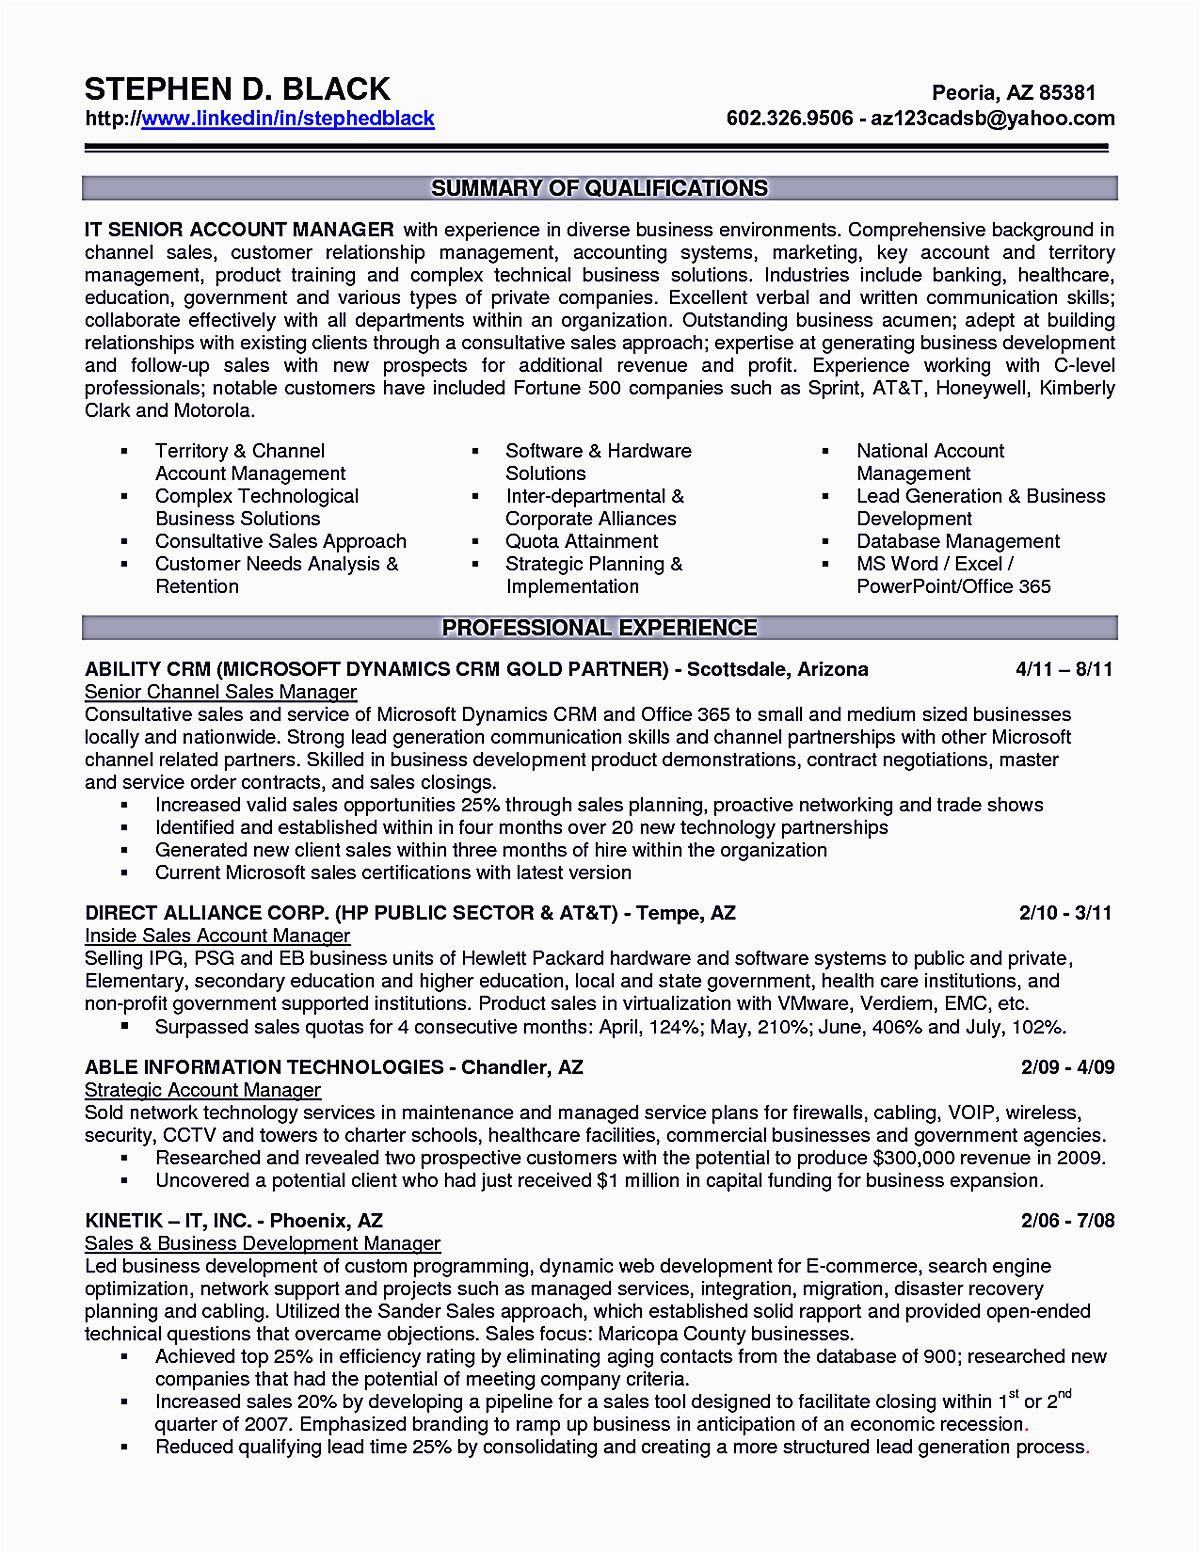 Sample Resume for Account Executive Position Account Executive Resume is Like Your Weapon to the